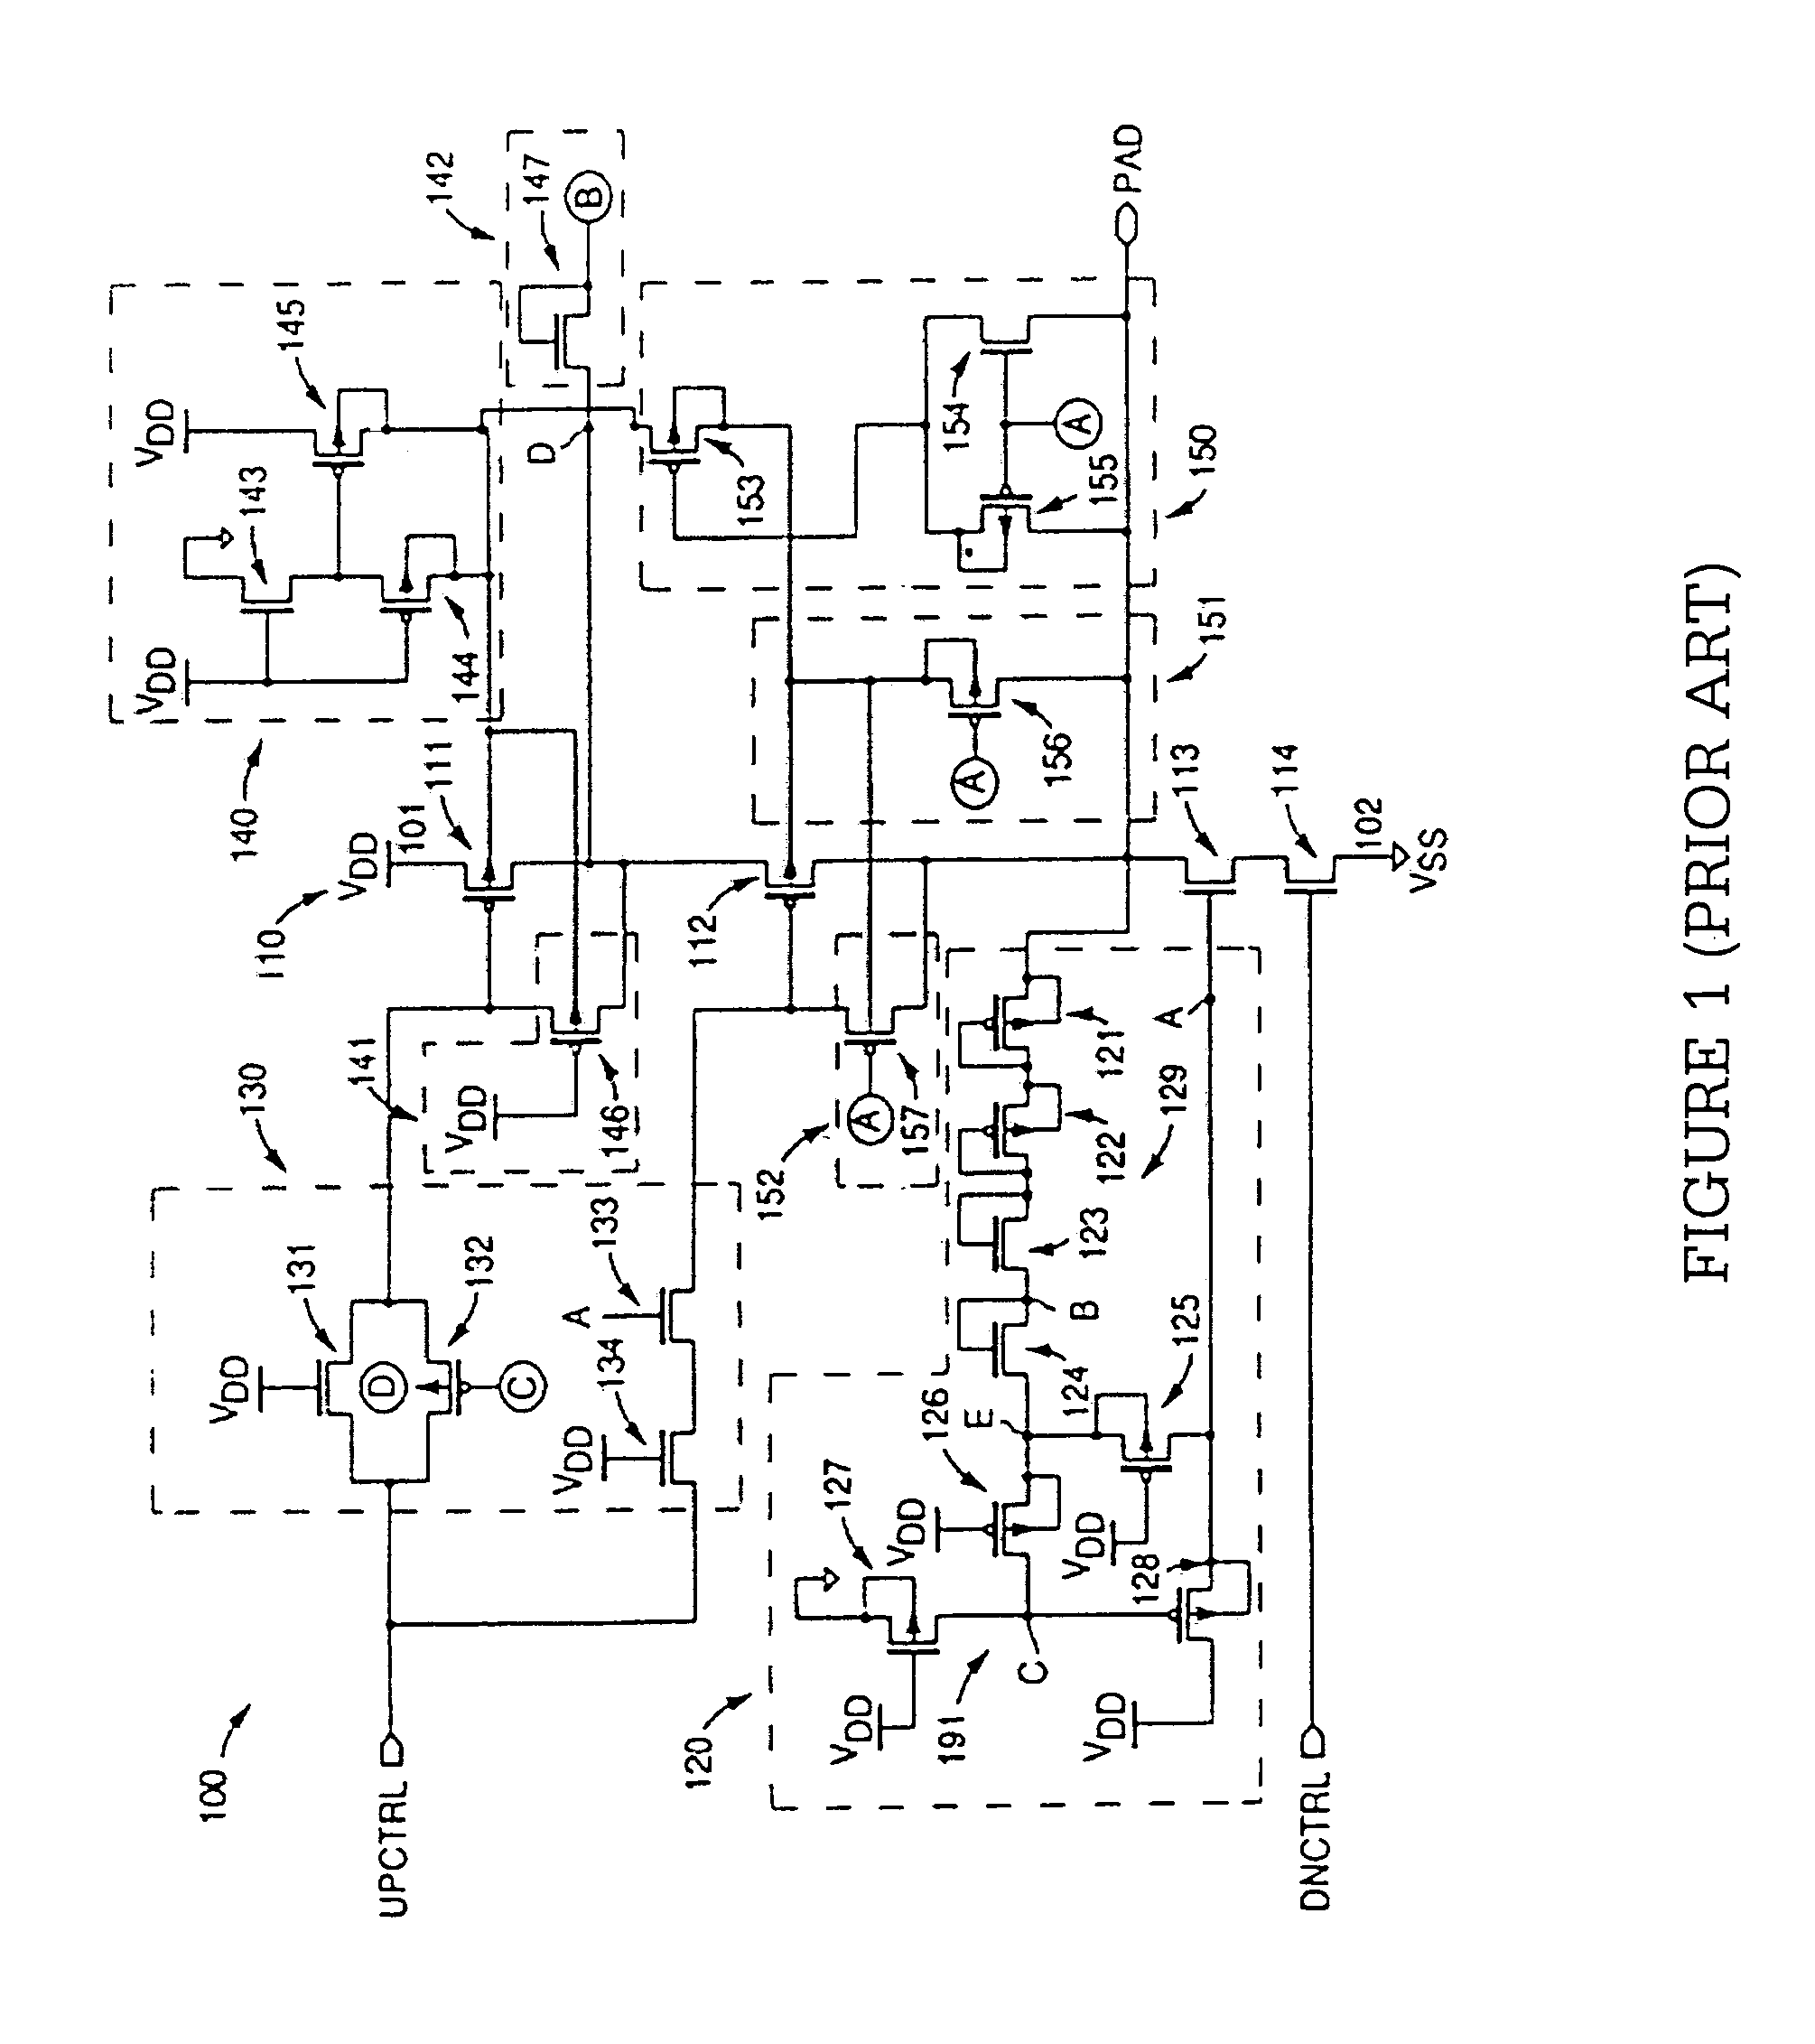 Circuitry for providing overvoltage backdrive protection